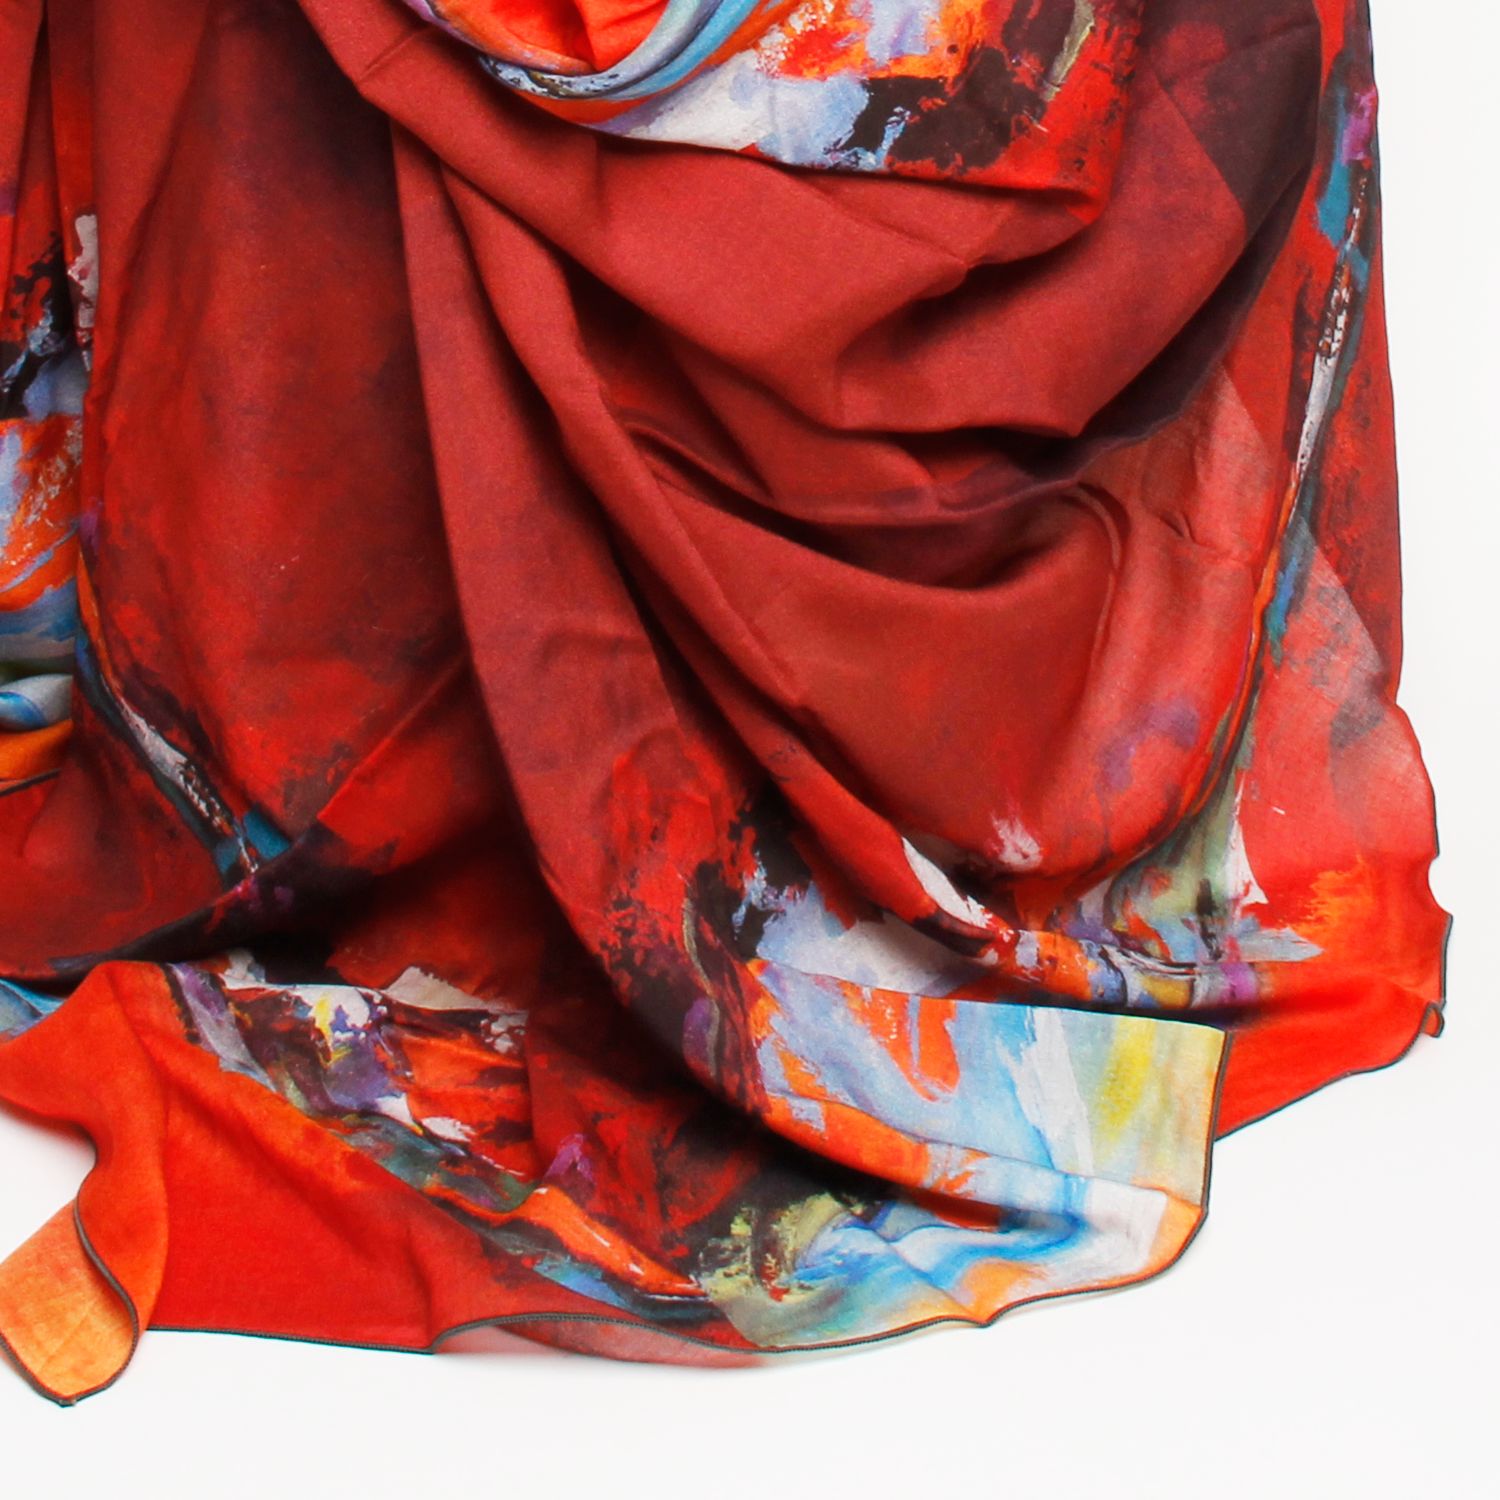 Lydia Panart: Symphony in Red Scarf Product Image 4 of 4